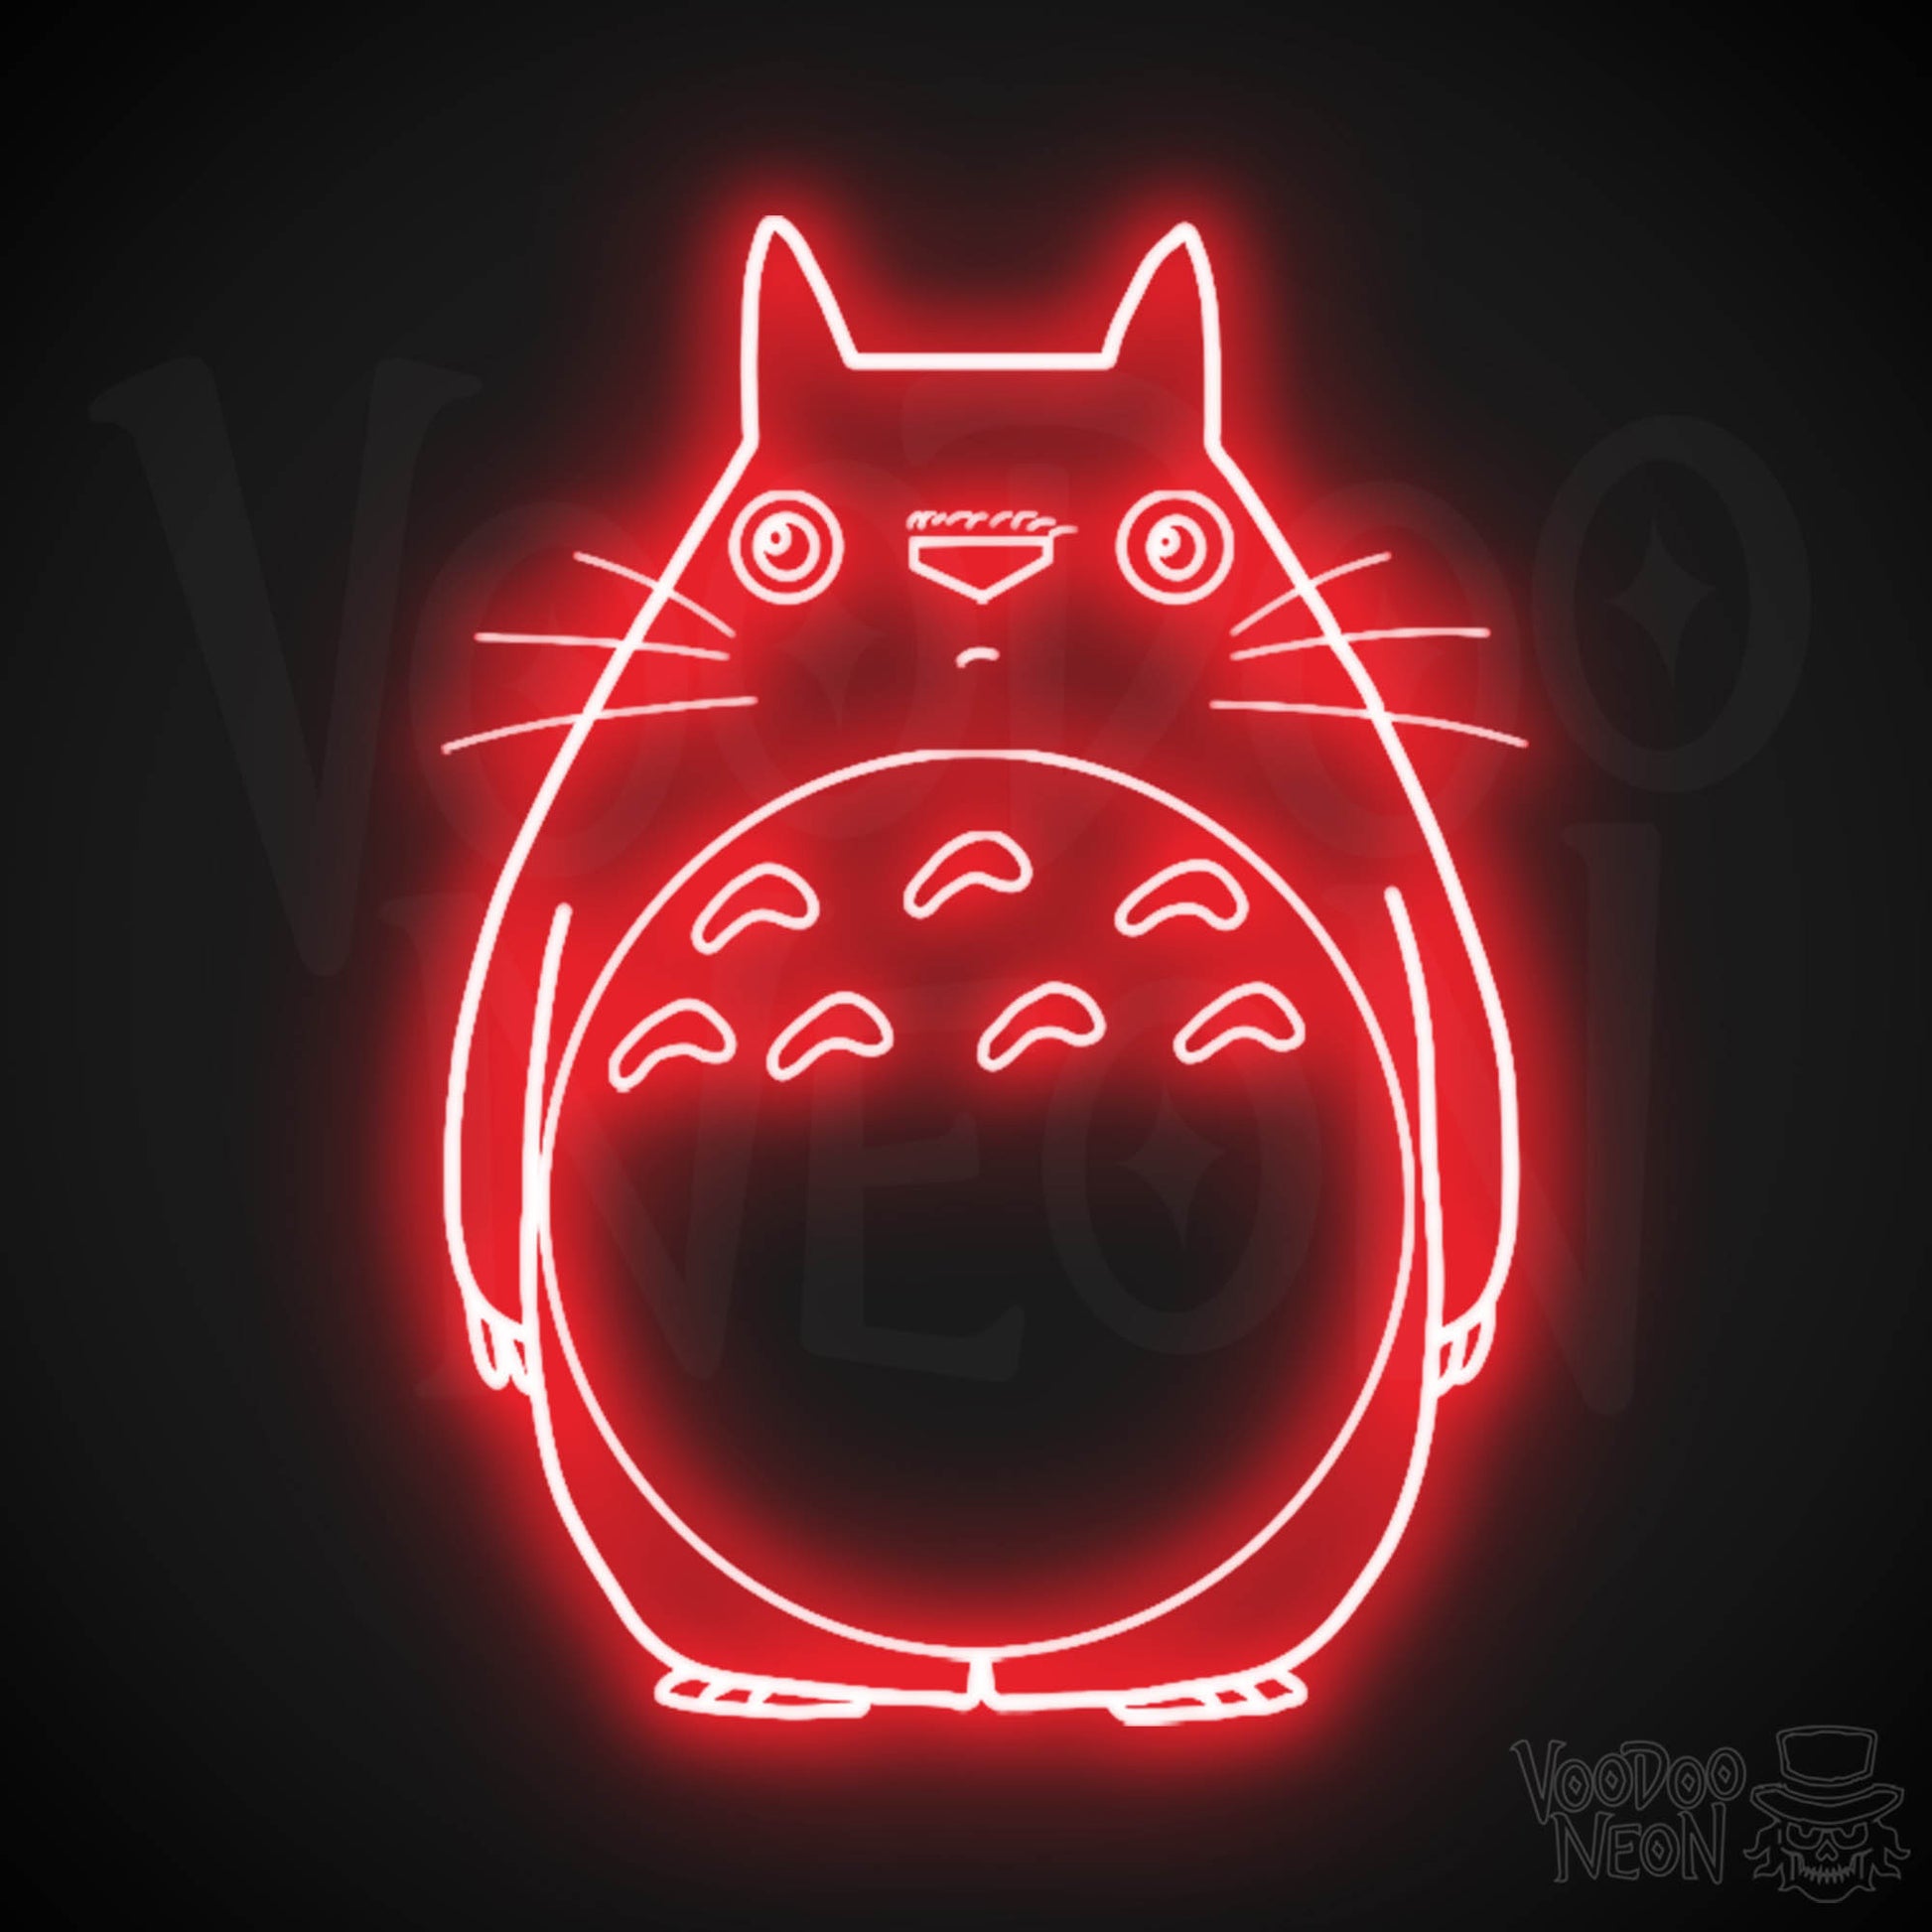 Totoro Neon Wall Art - Neon Totoro Sign - Totoro Neon Sign - LED Wall Art - Color Red